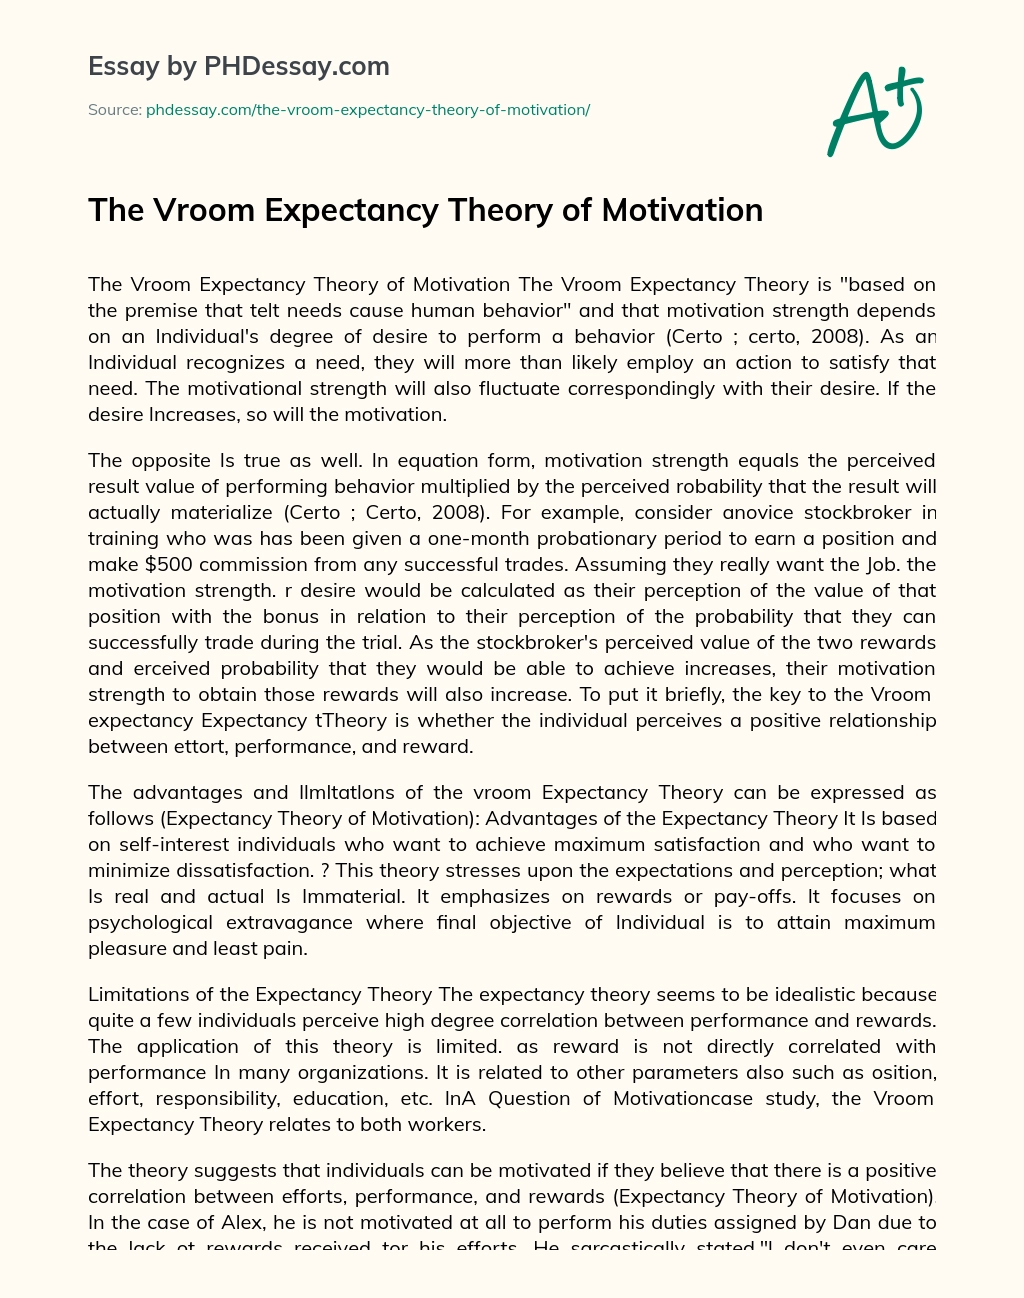 The Vroom Expectancy Theory of Motivation essay